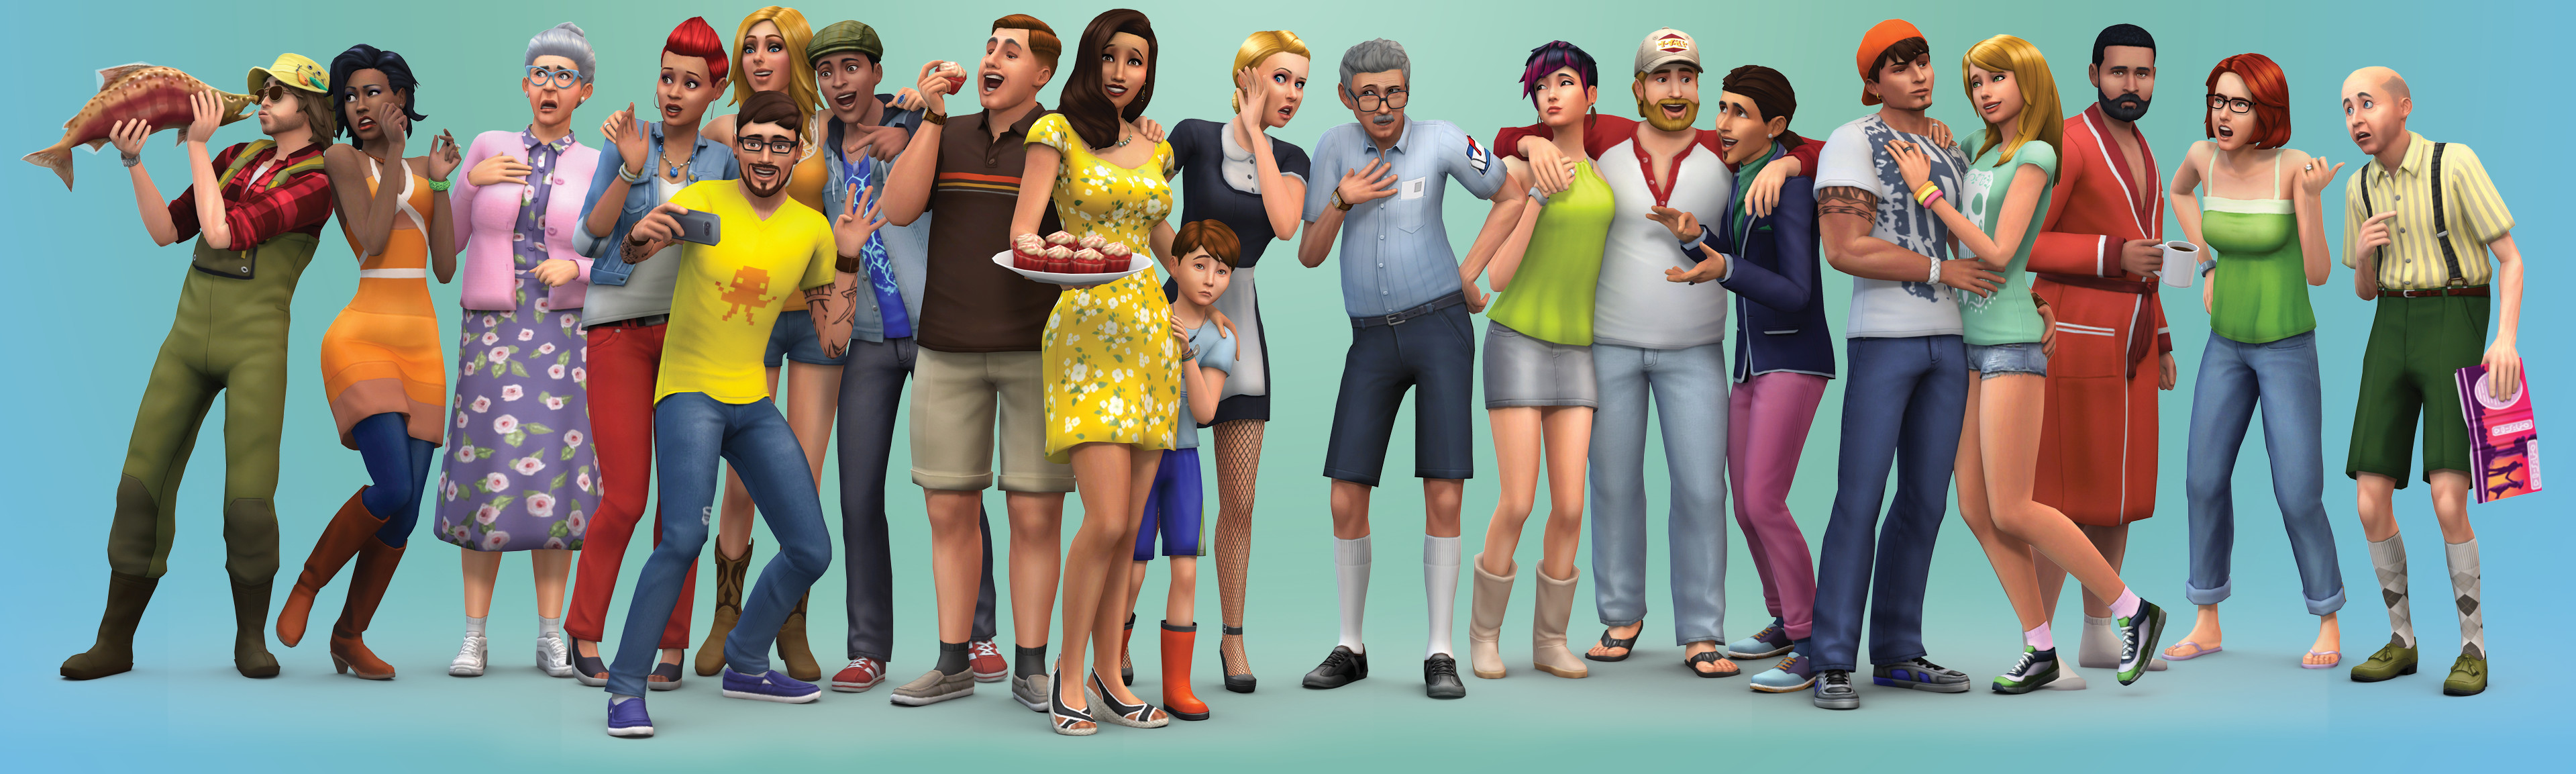 3839x1153 SimFans: New Sims 4 Render + Downloadable Wallpapers!